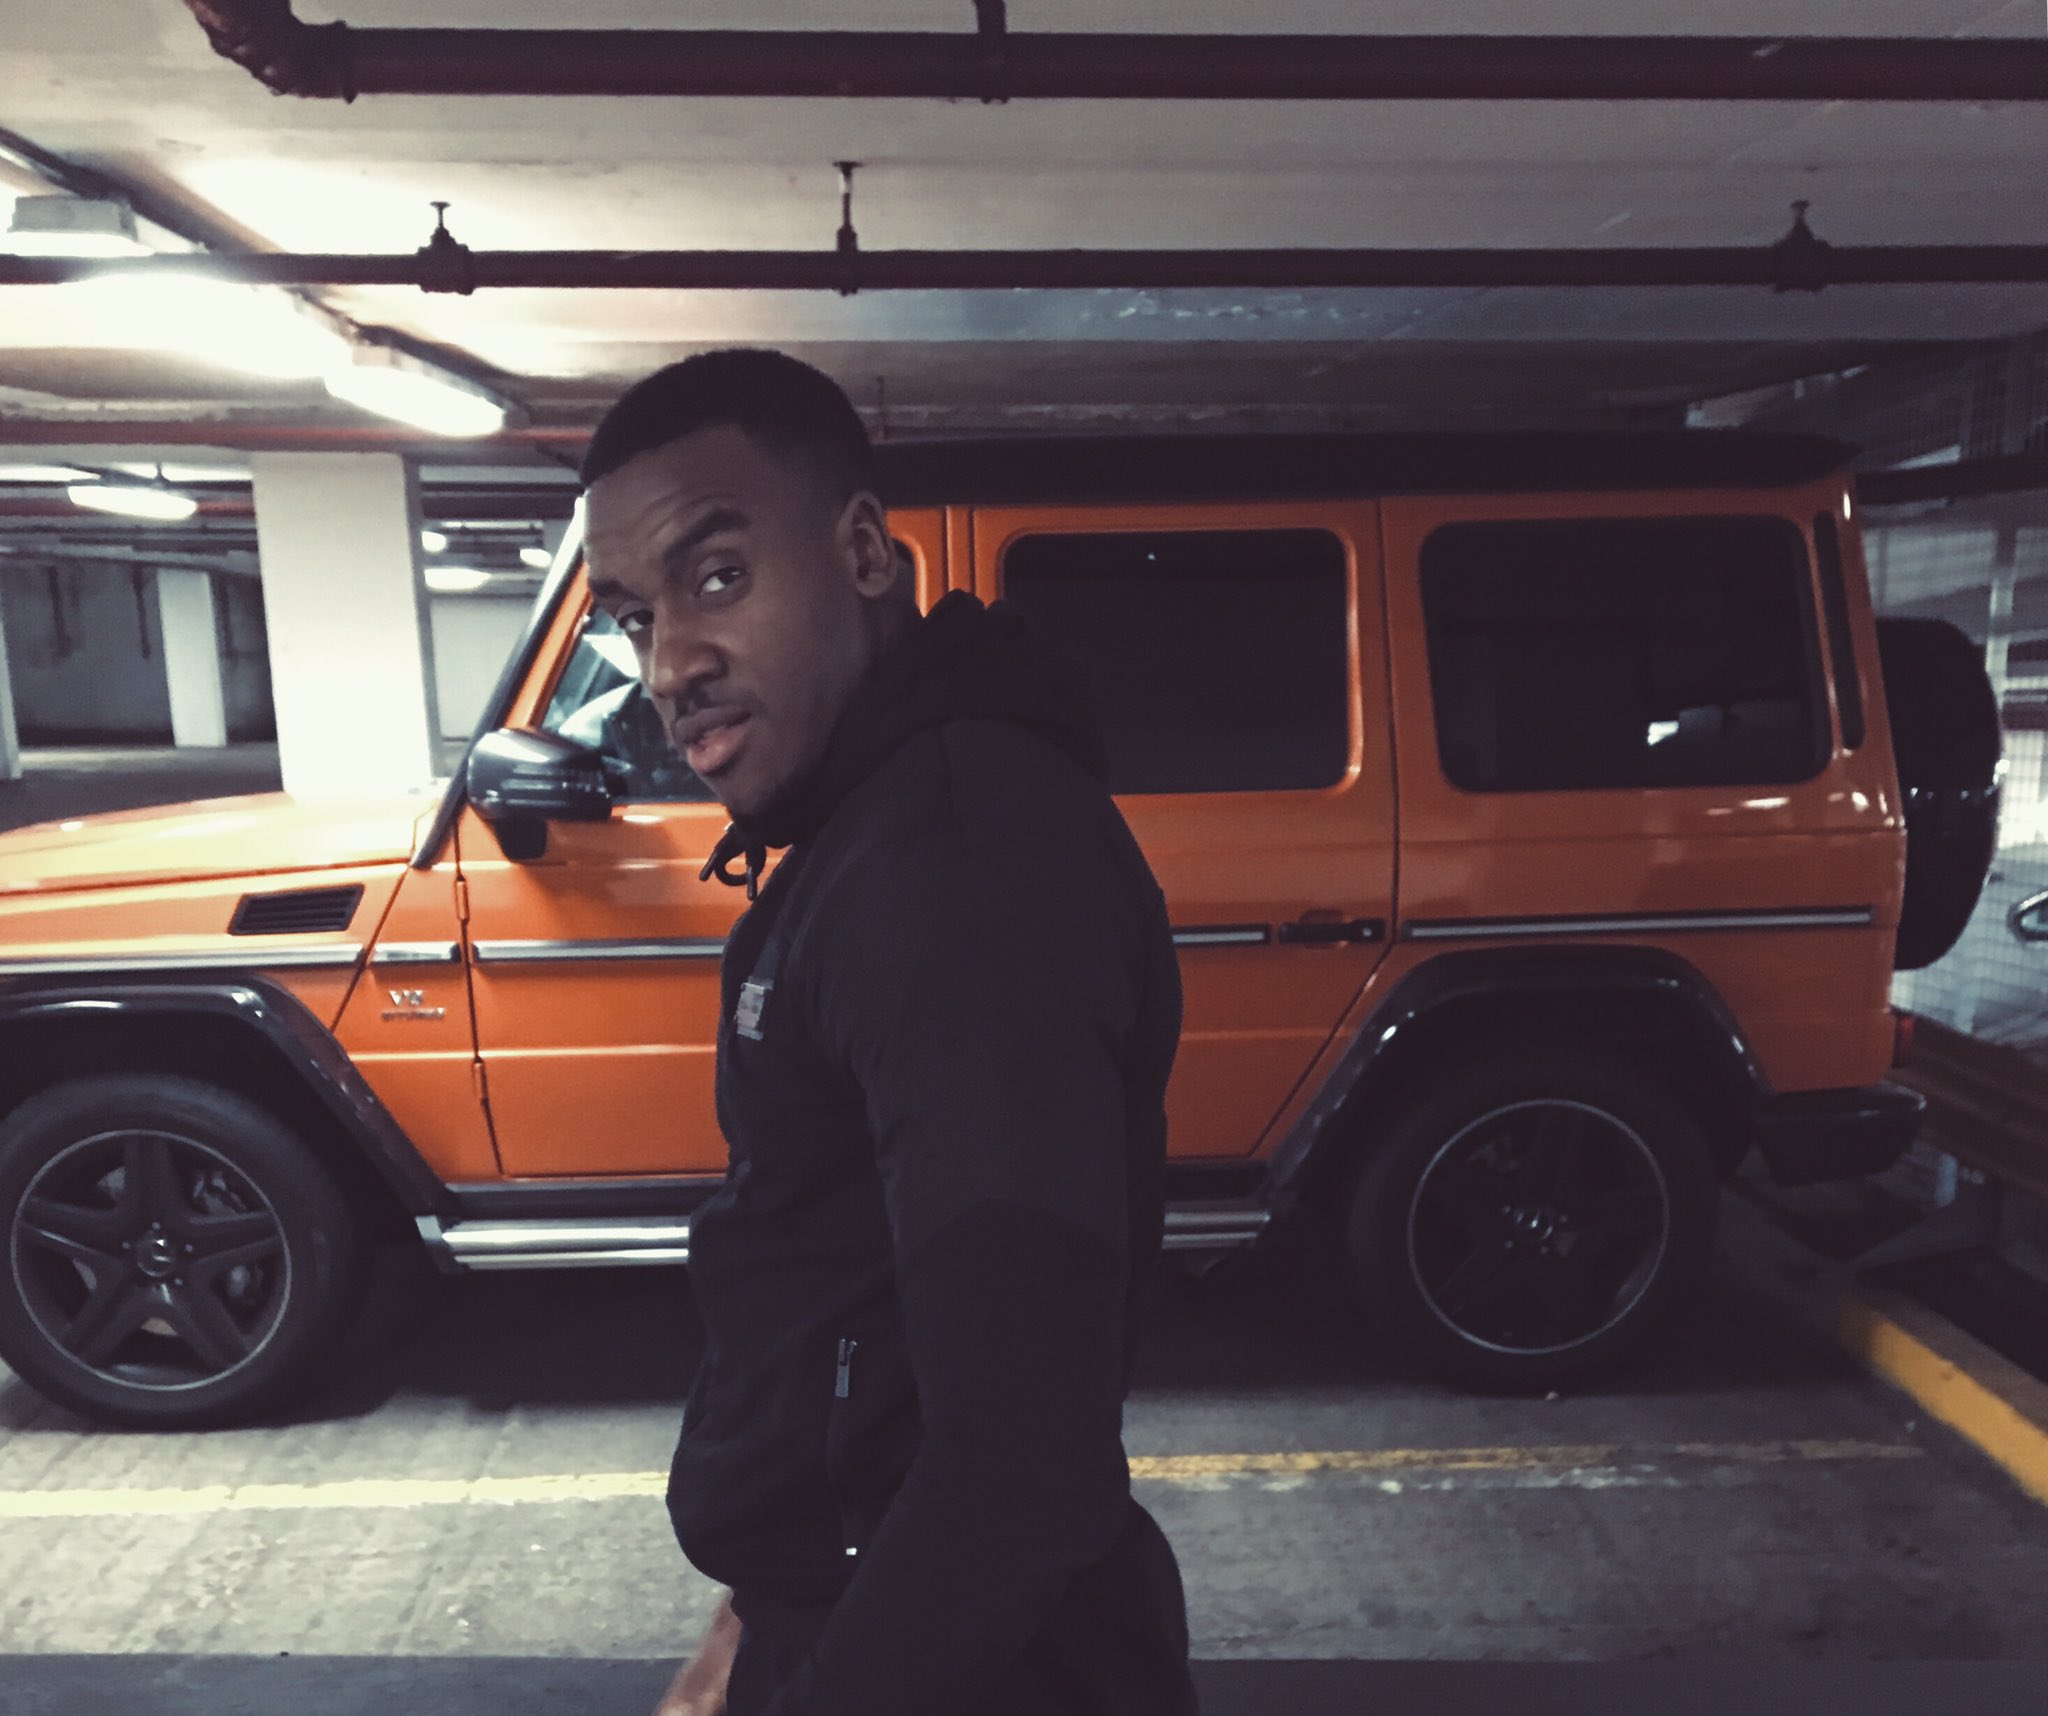 Bugzy Malone on X: Man wanna reach the heights that i've reached